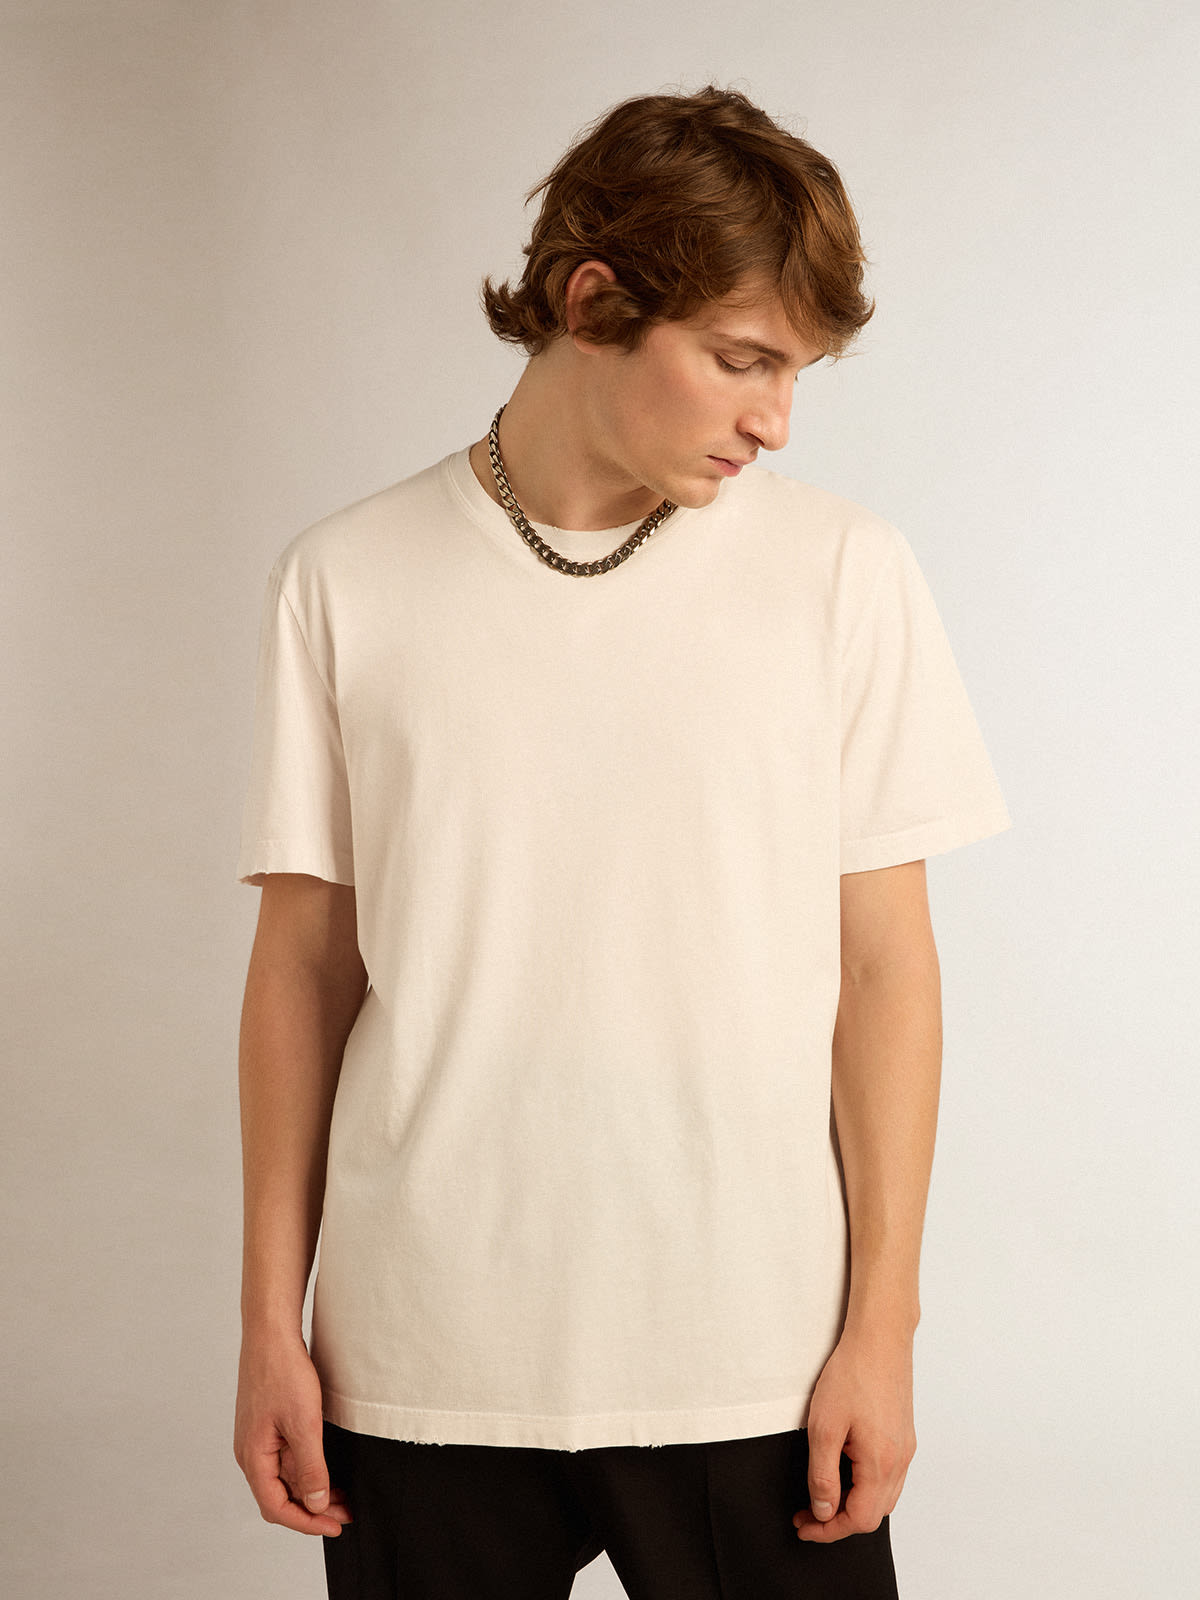 Golden Goose - Men's white T-shirt with distressed treatment in 